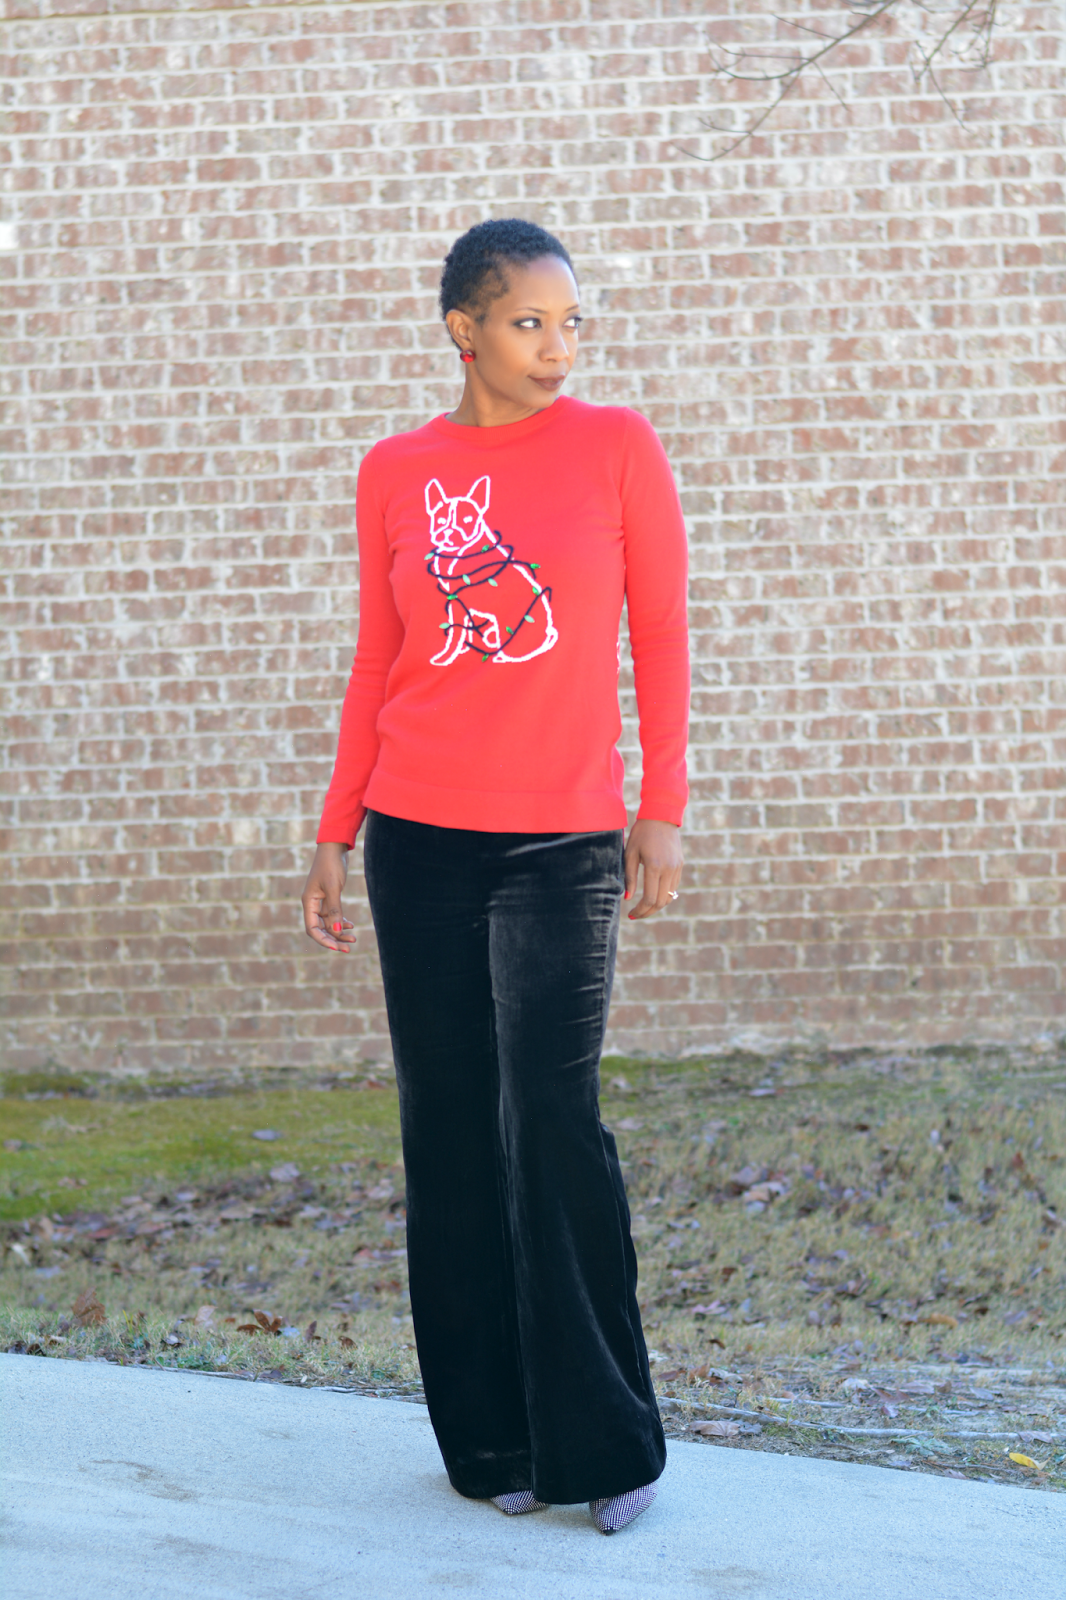 terrier dog christmas sweater from crown & ivy collection at belk